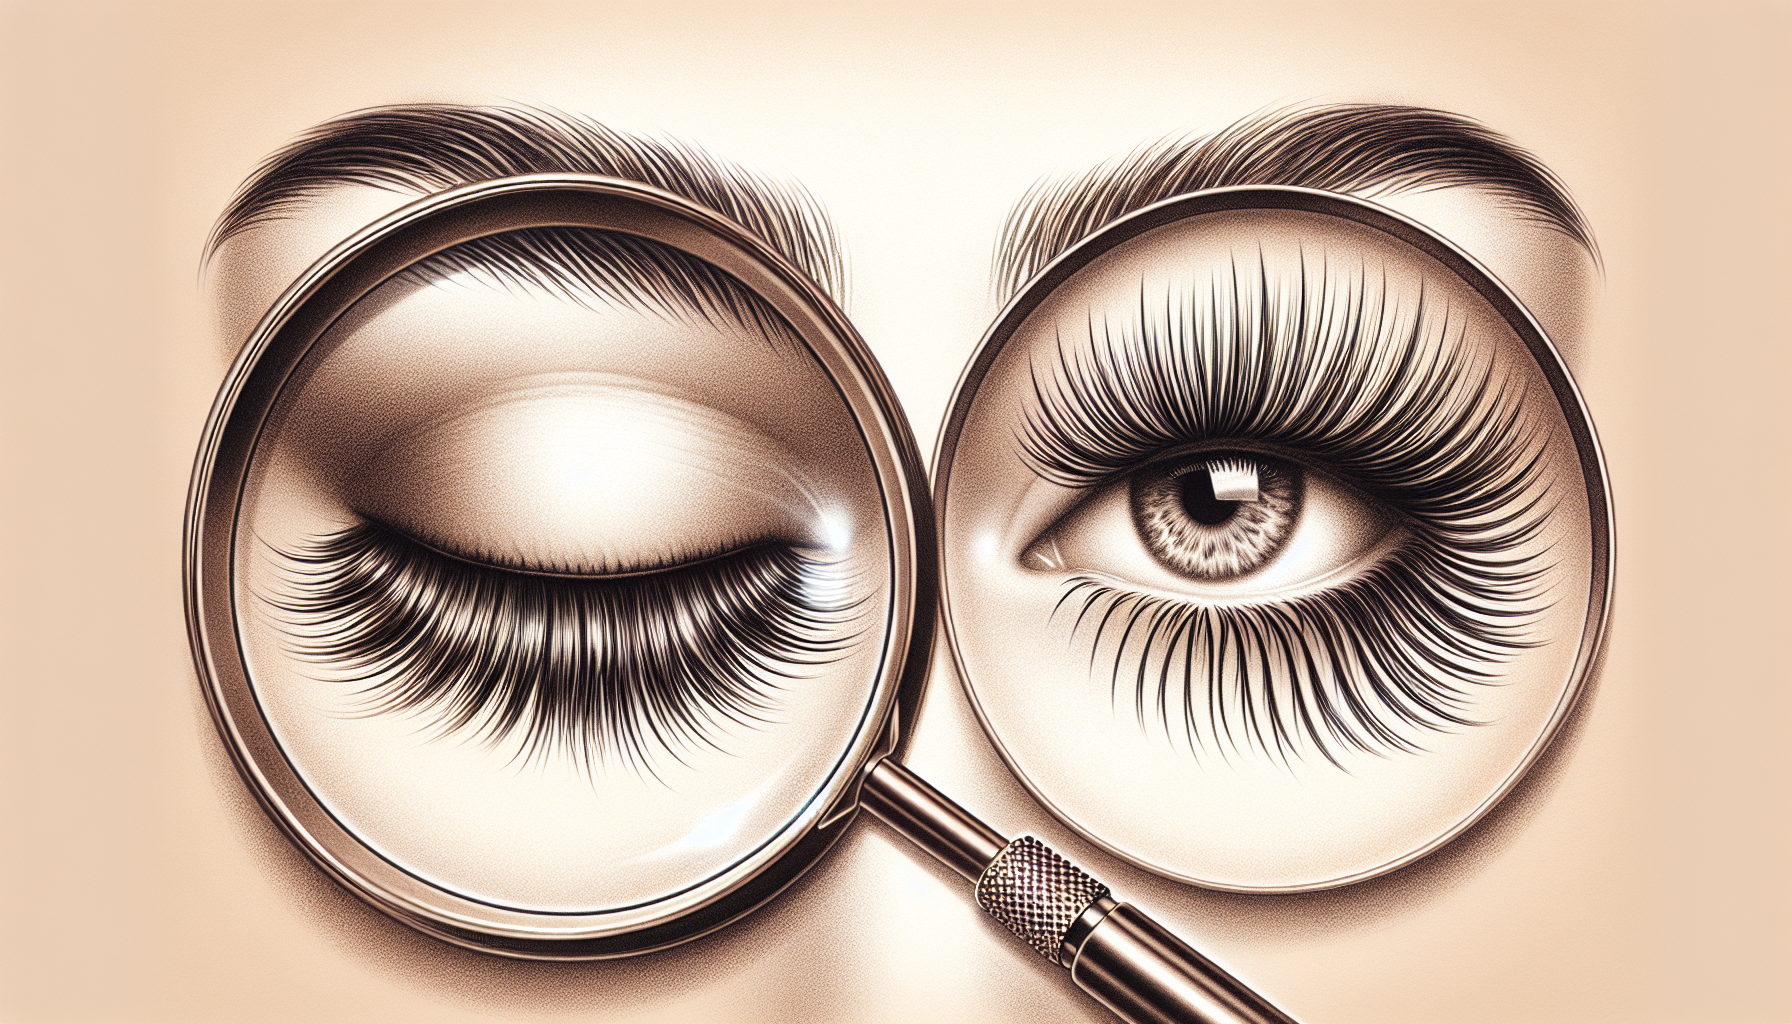 Illustration of natural lashes and lash extensions